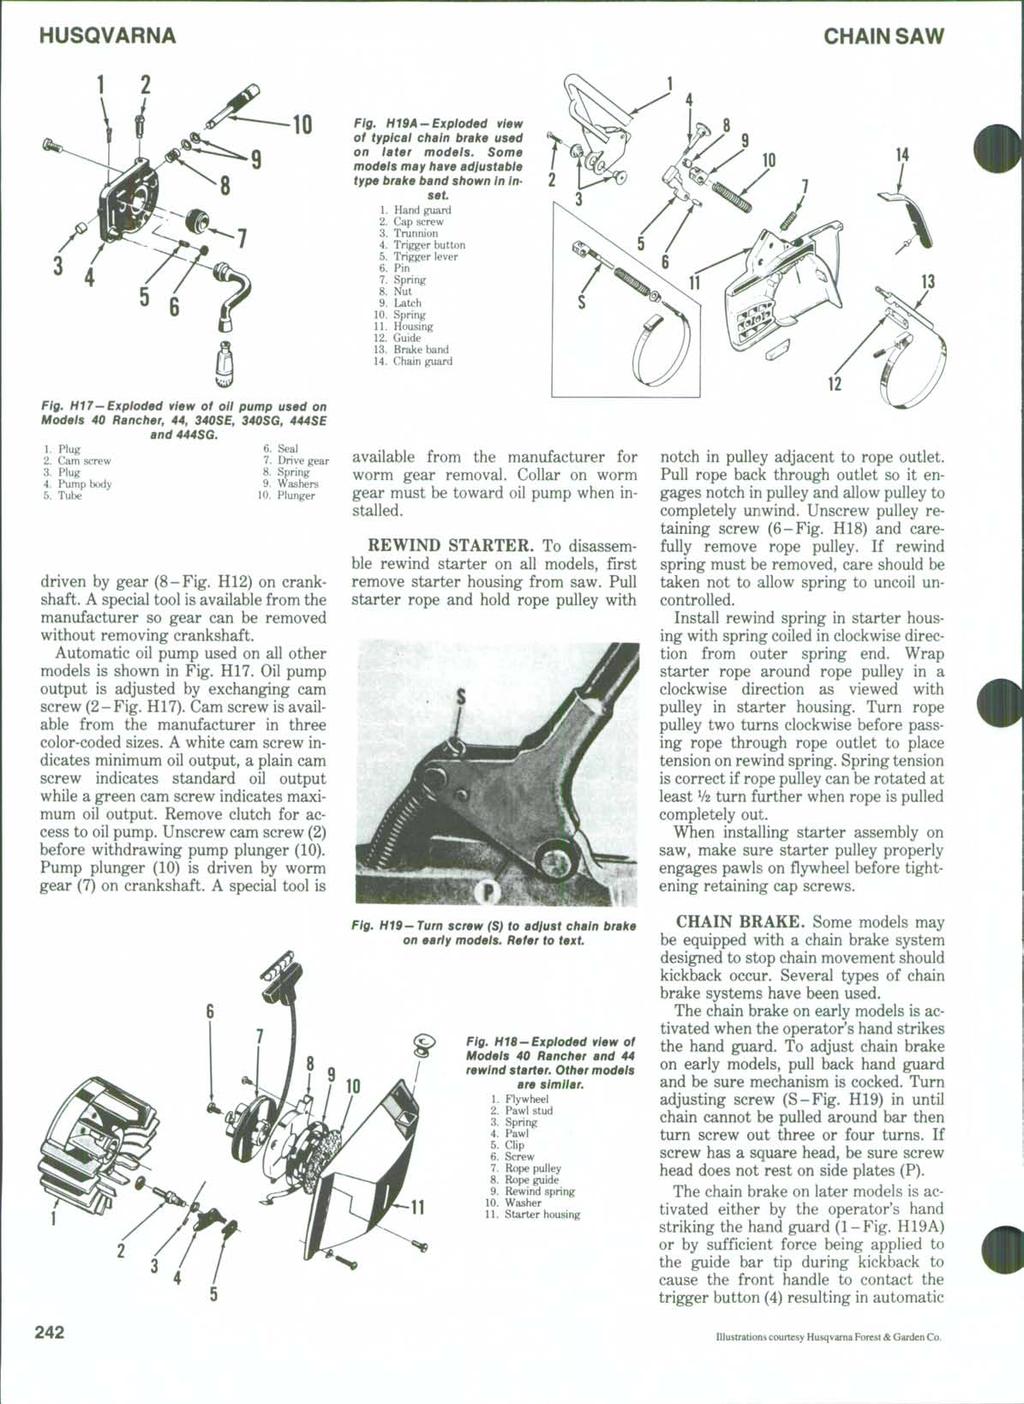 CHAIN SAW Fig. H19A-Exploded view of typical chain brake used on later models. Some models may have adjustable type brake band shown In inset. 1. Hand guard 2. Cap screw 3. Trunnion 4.